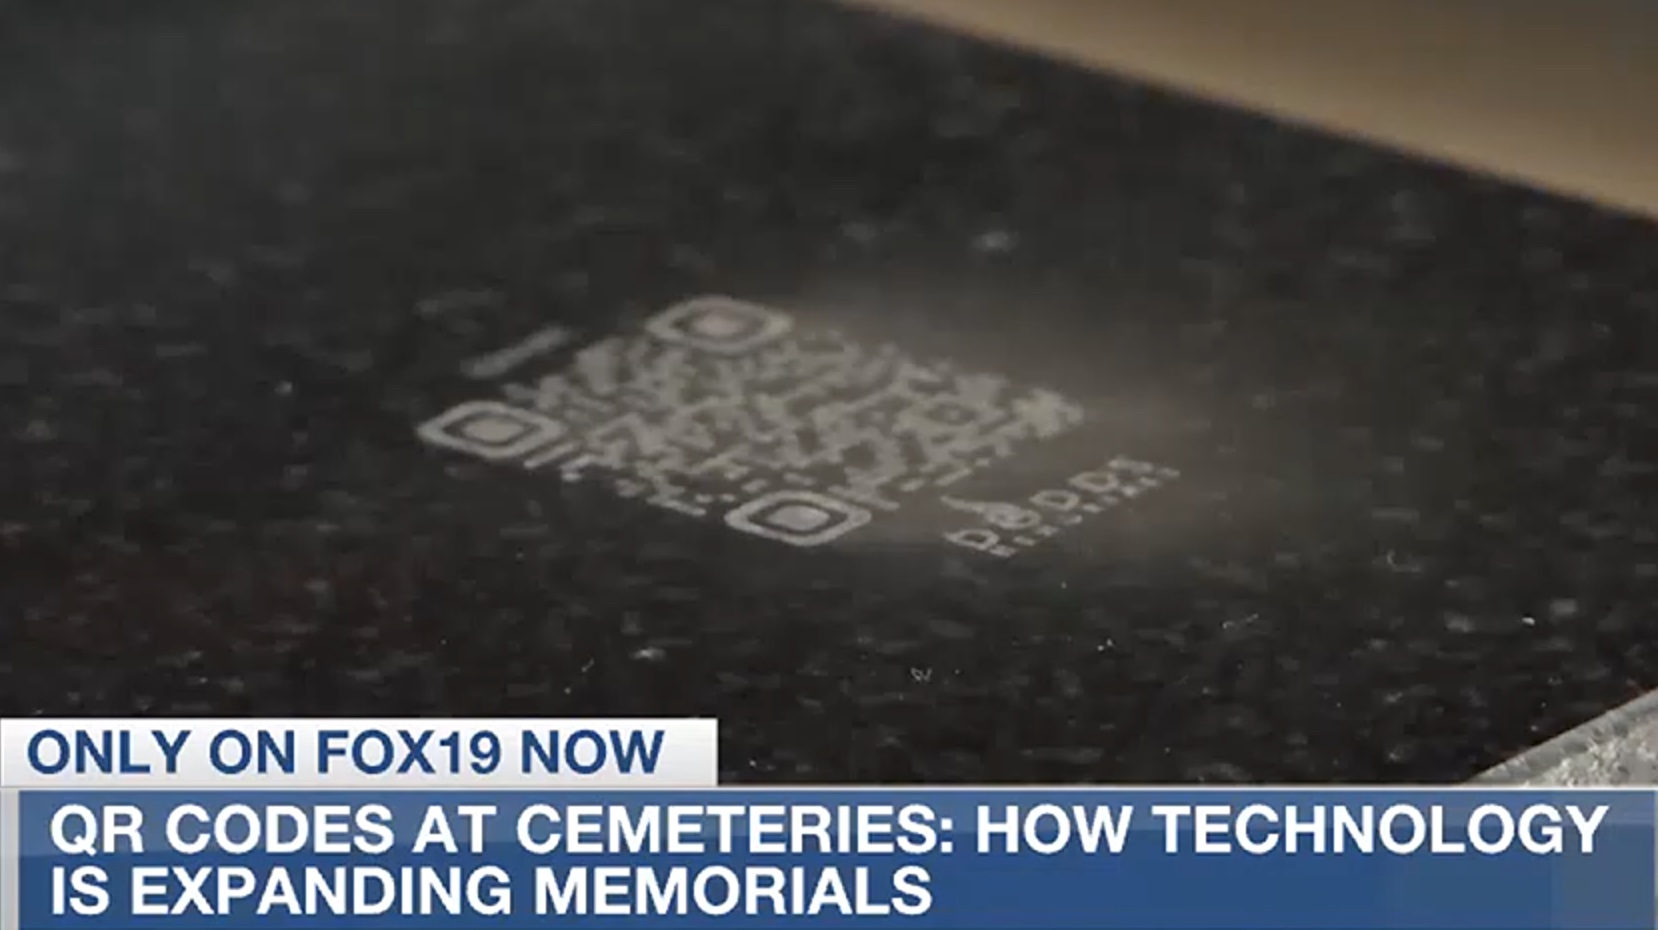 Dodds is adding QR Codes to memorials extending 160 years of innovation.